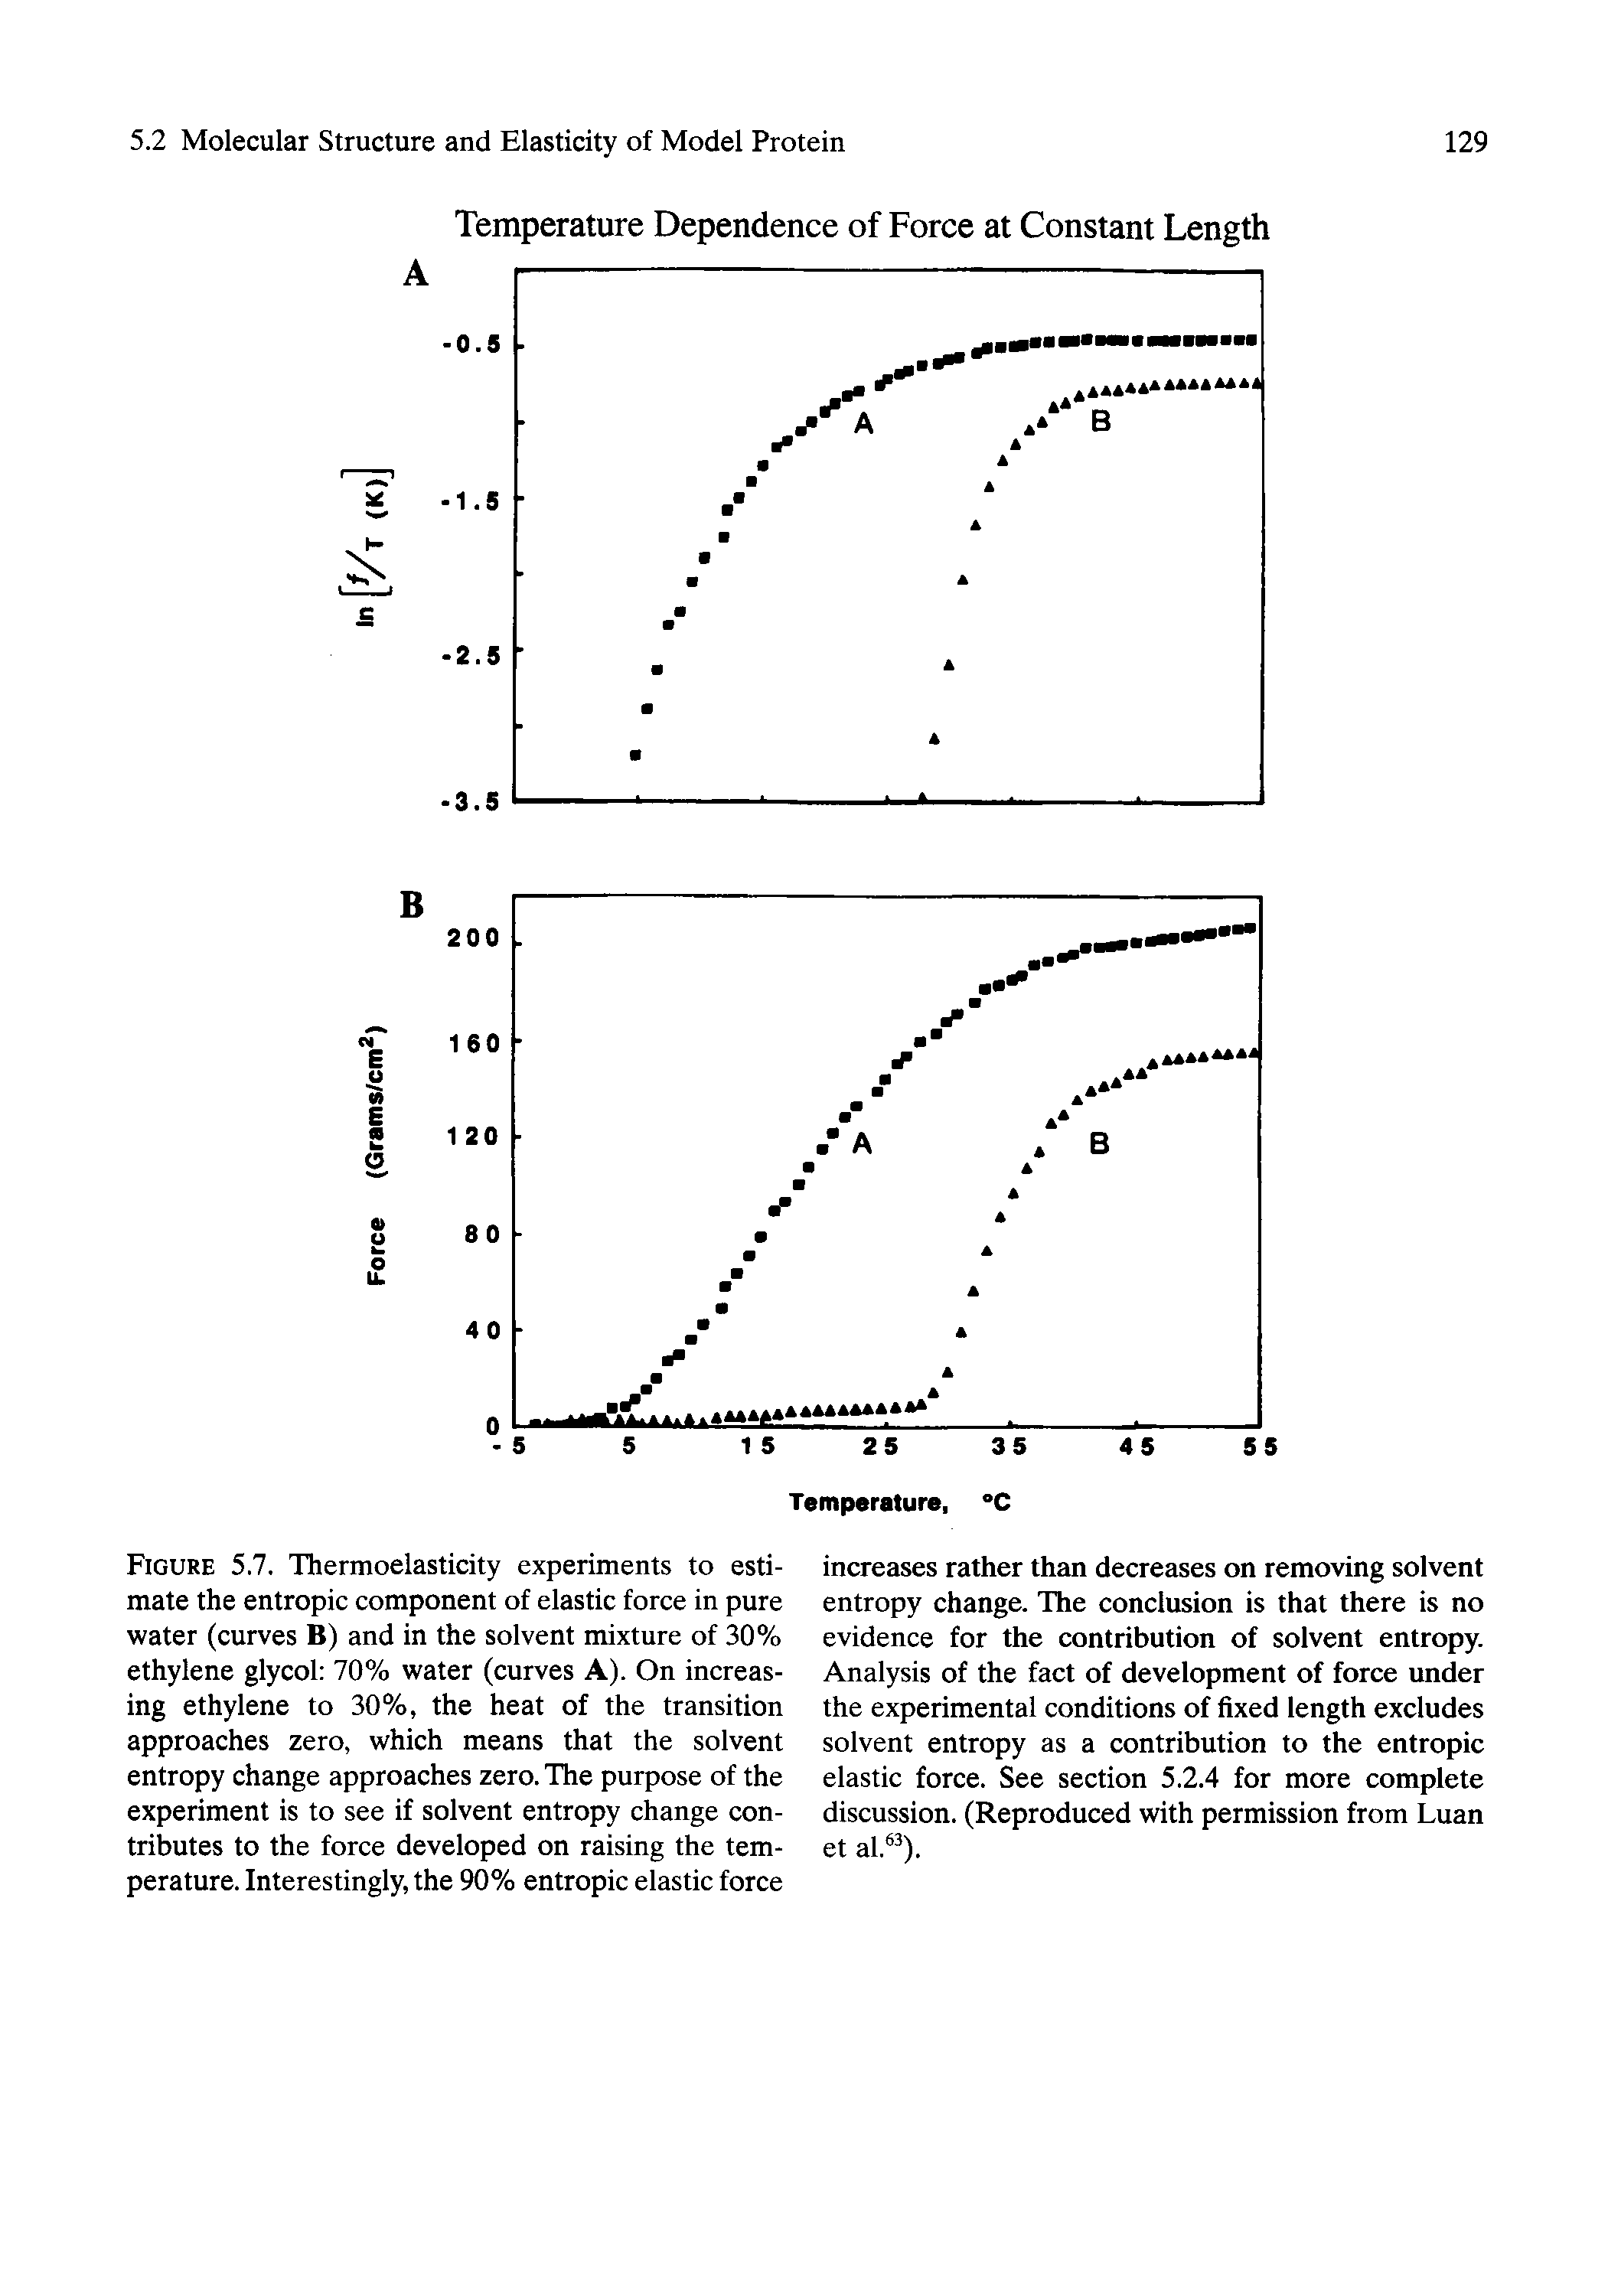 Figure 5.7. Thermoelasticity experiments to estimate the entropic component of elastic force in pure water (curves B) and in the solvent mixture of 30% ethylene glycol 70% water (curves A). On increasing ethylene to 30%, the heat of the transition approaches zero, which means that the solvent entropy change approaches zero. The purpose of the experiment is to see if solvent entropy change contributes to the force developed on raising the temperature. Interestingly, the 90% entropic elastic force...